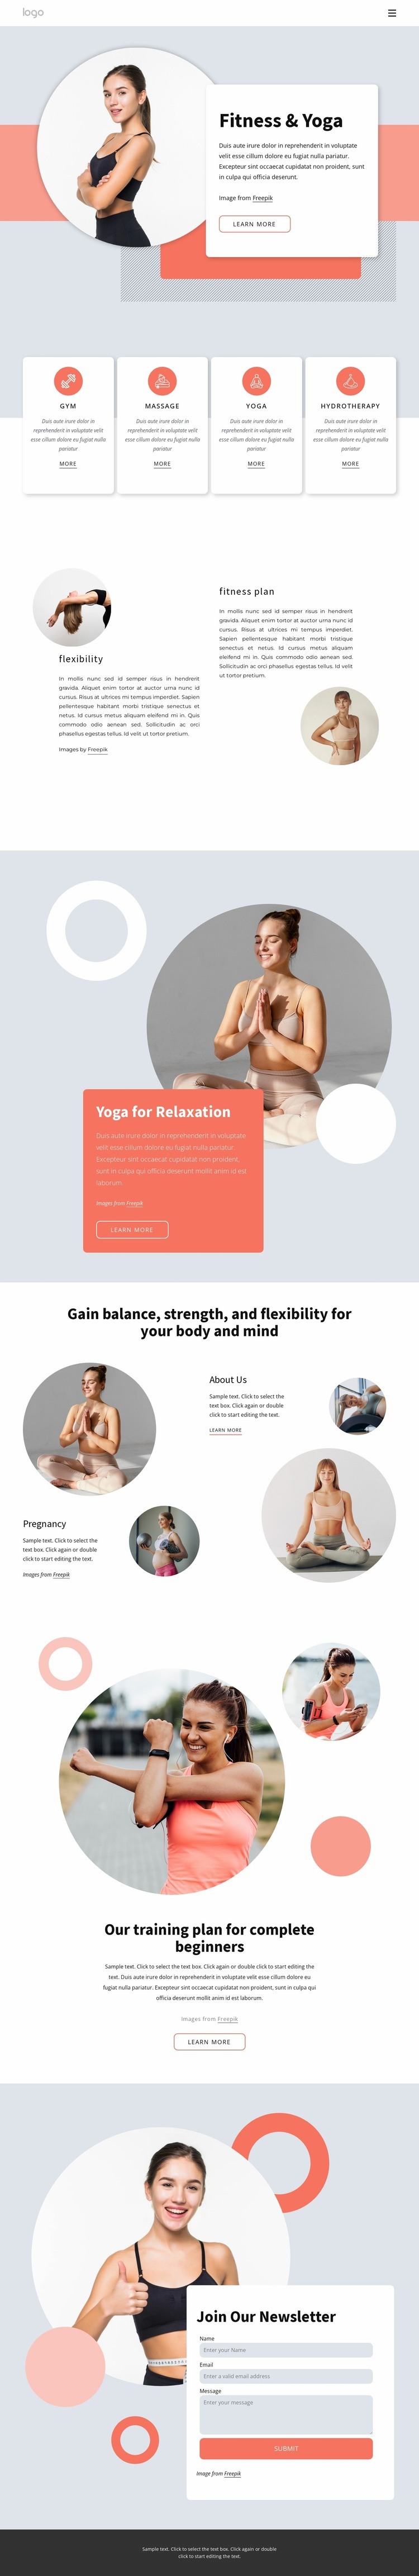 Fitness and yoga Wix Template Alternative